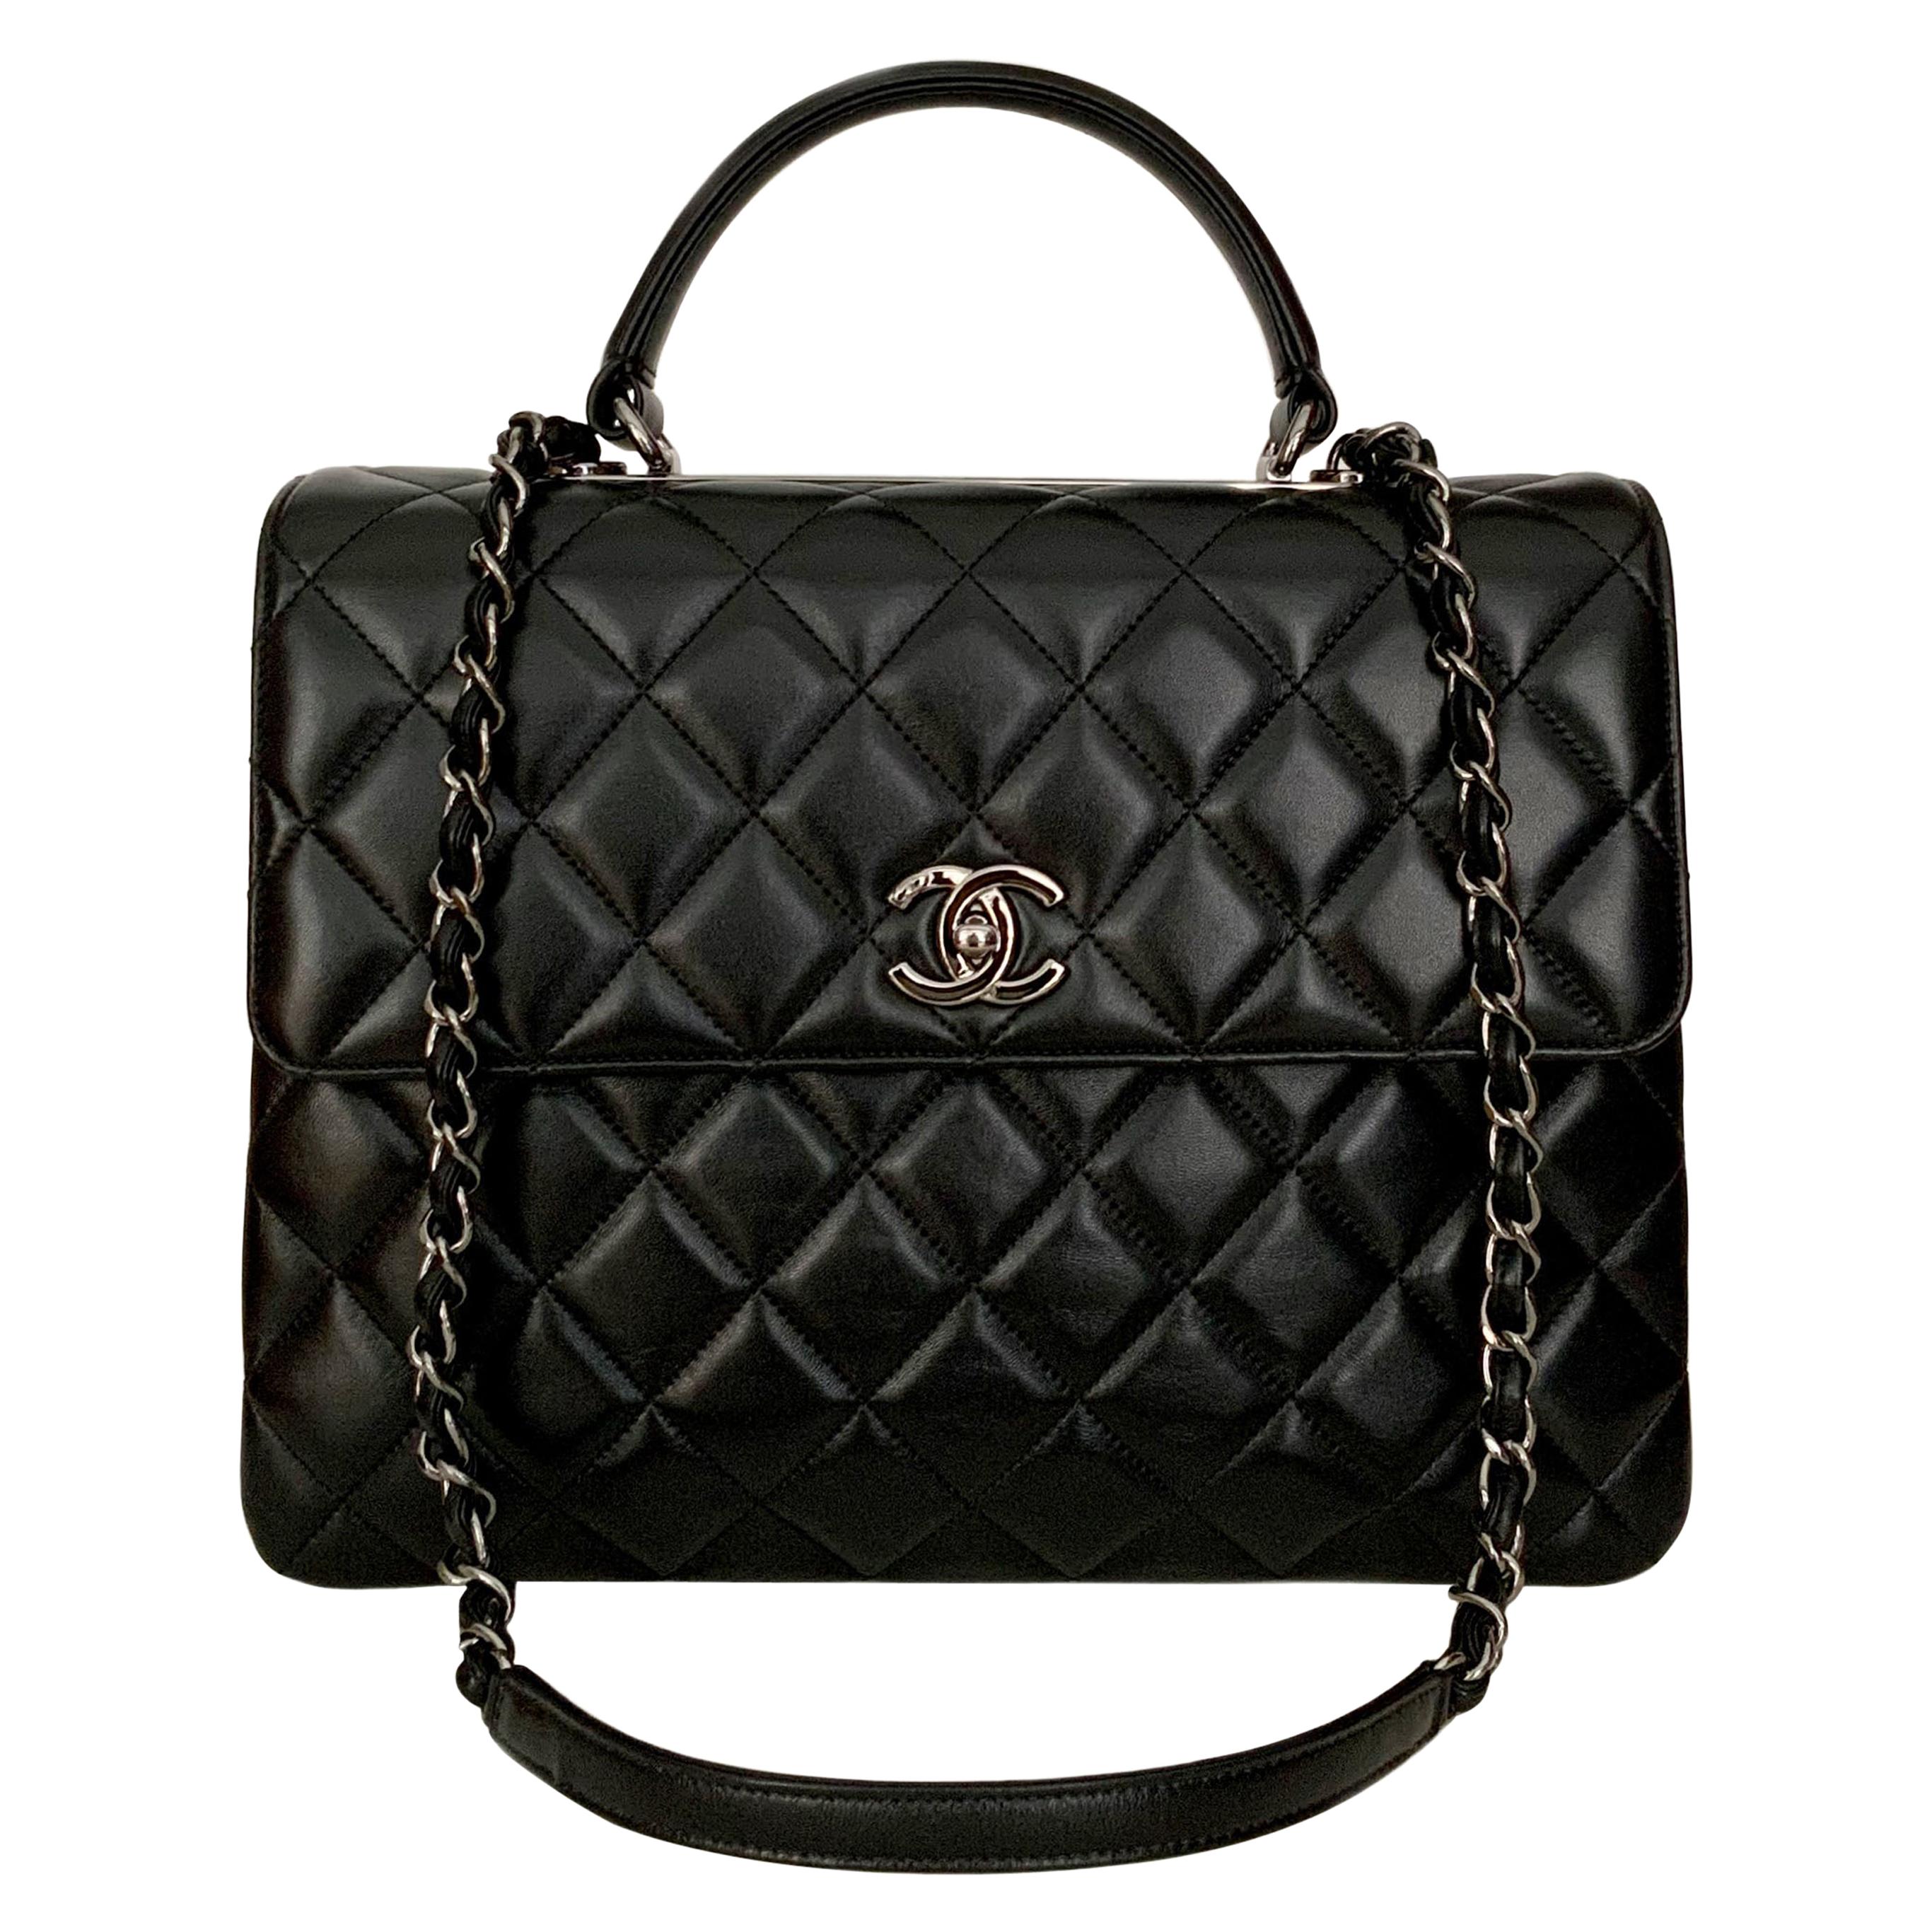 Trendy cc top handle leather handbag Chanel Black in Leather - 30299770